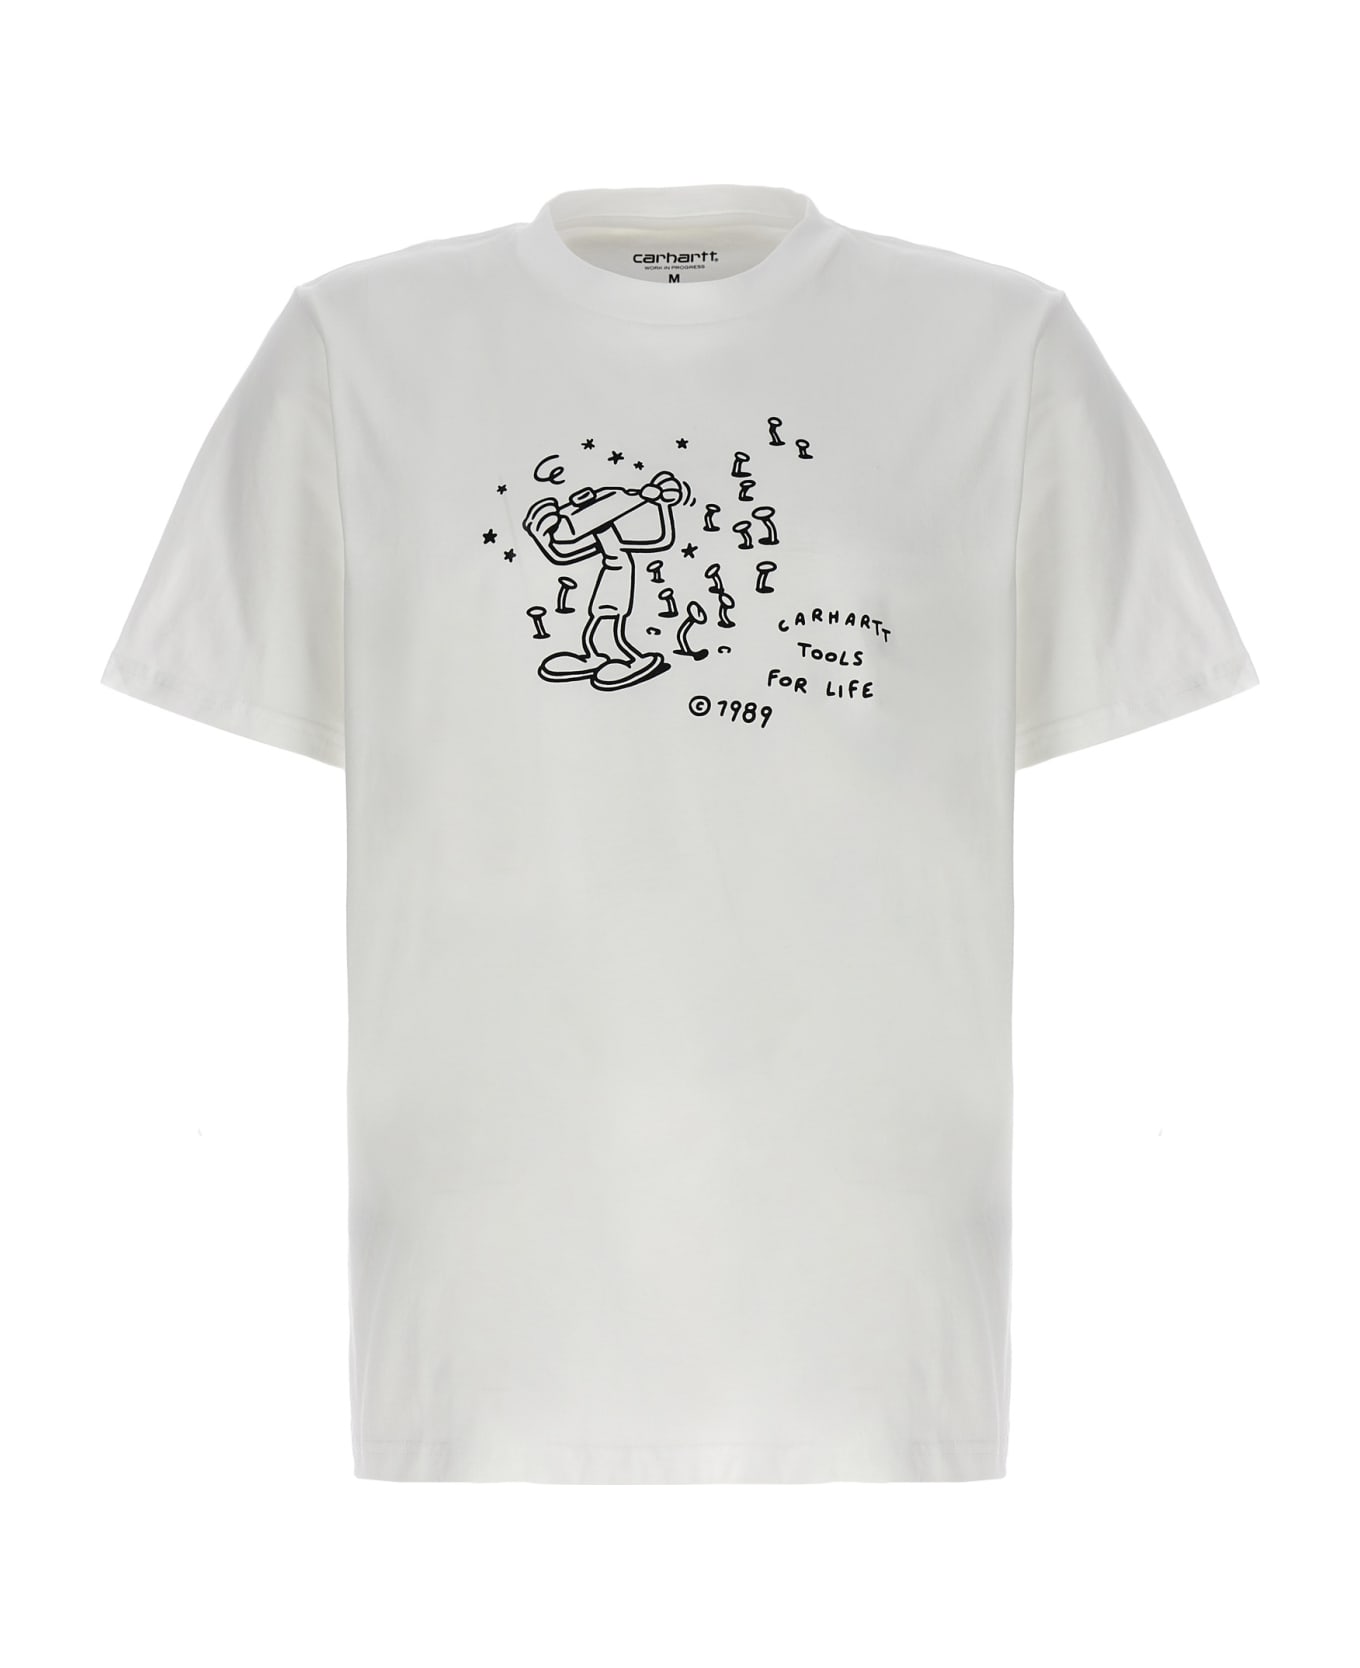 Carhartt WIP 'tools For Life' T-shirt - White シャツ